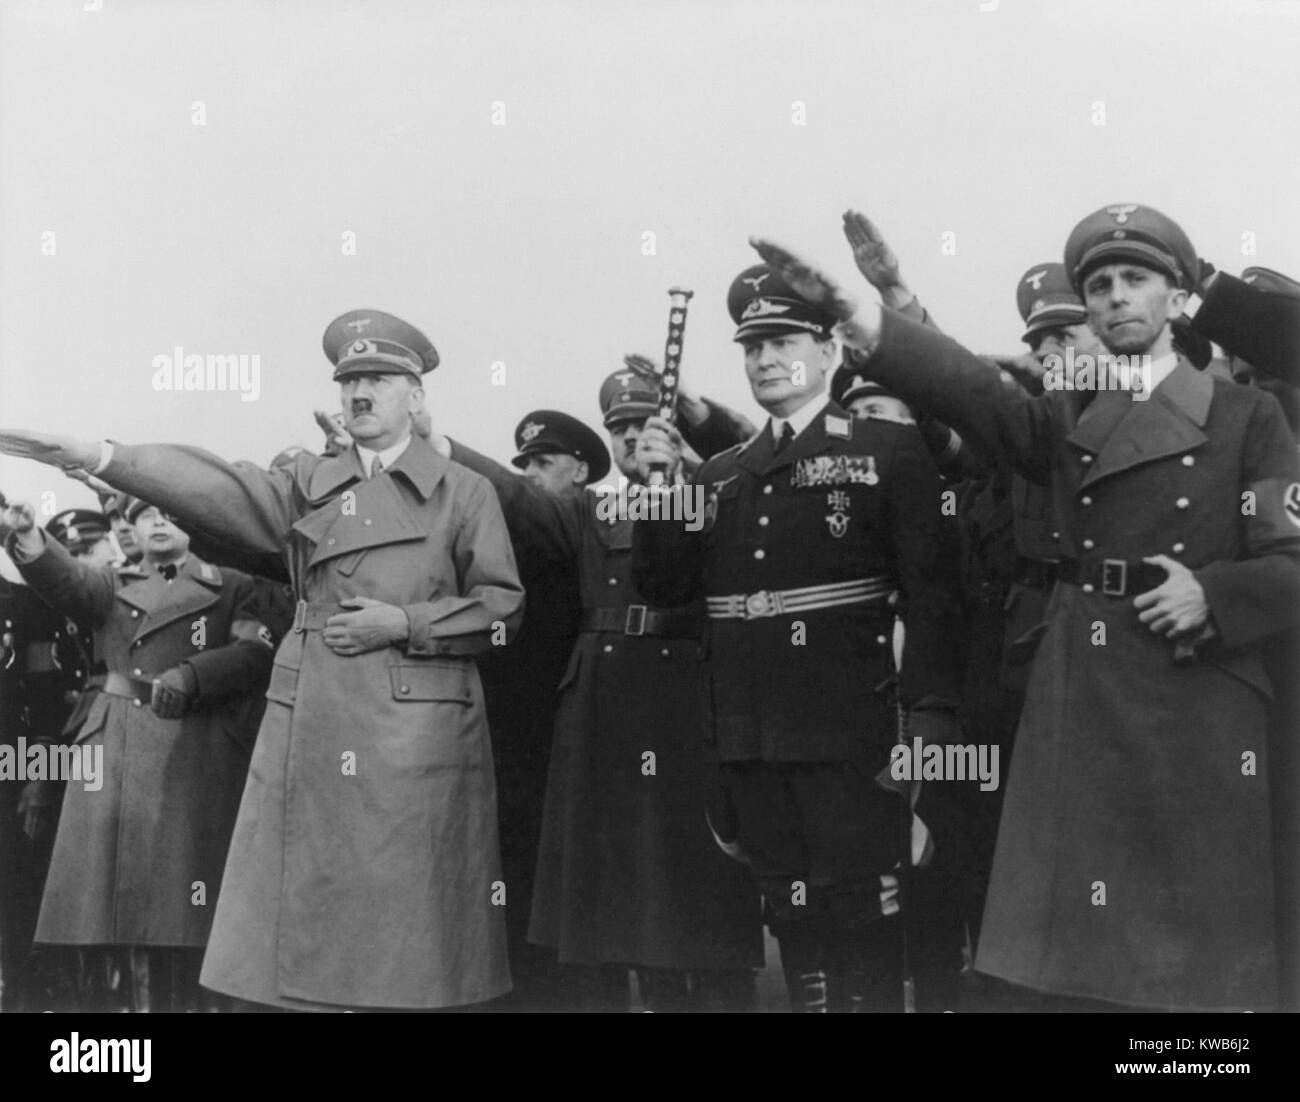 Hitler, with Goering and Goebbels, saluting upon his return from Austria. On the previous day Hitler signed the unification pact annexing Austria into Germany. March 16, 1938, Berlin, Germany. (BSLOC 2014 8 170) Stock Photo